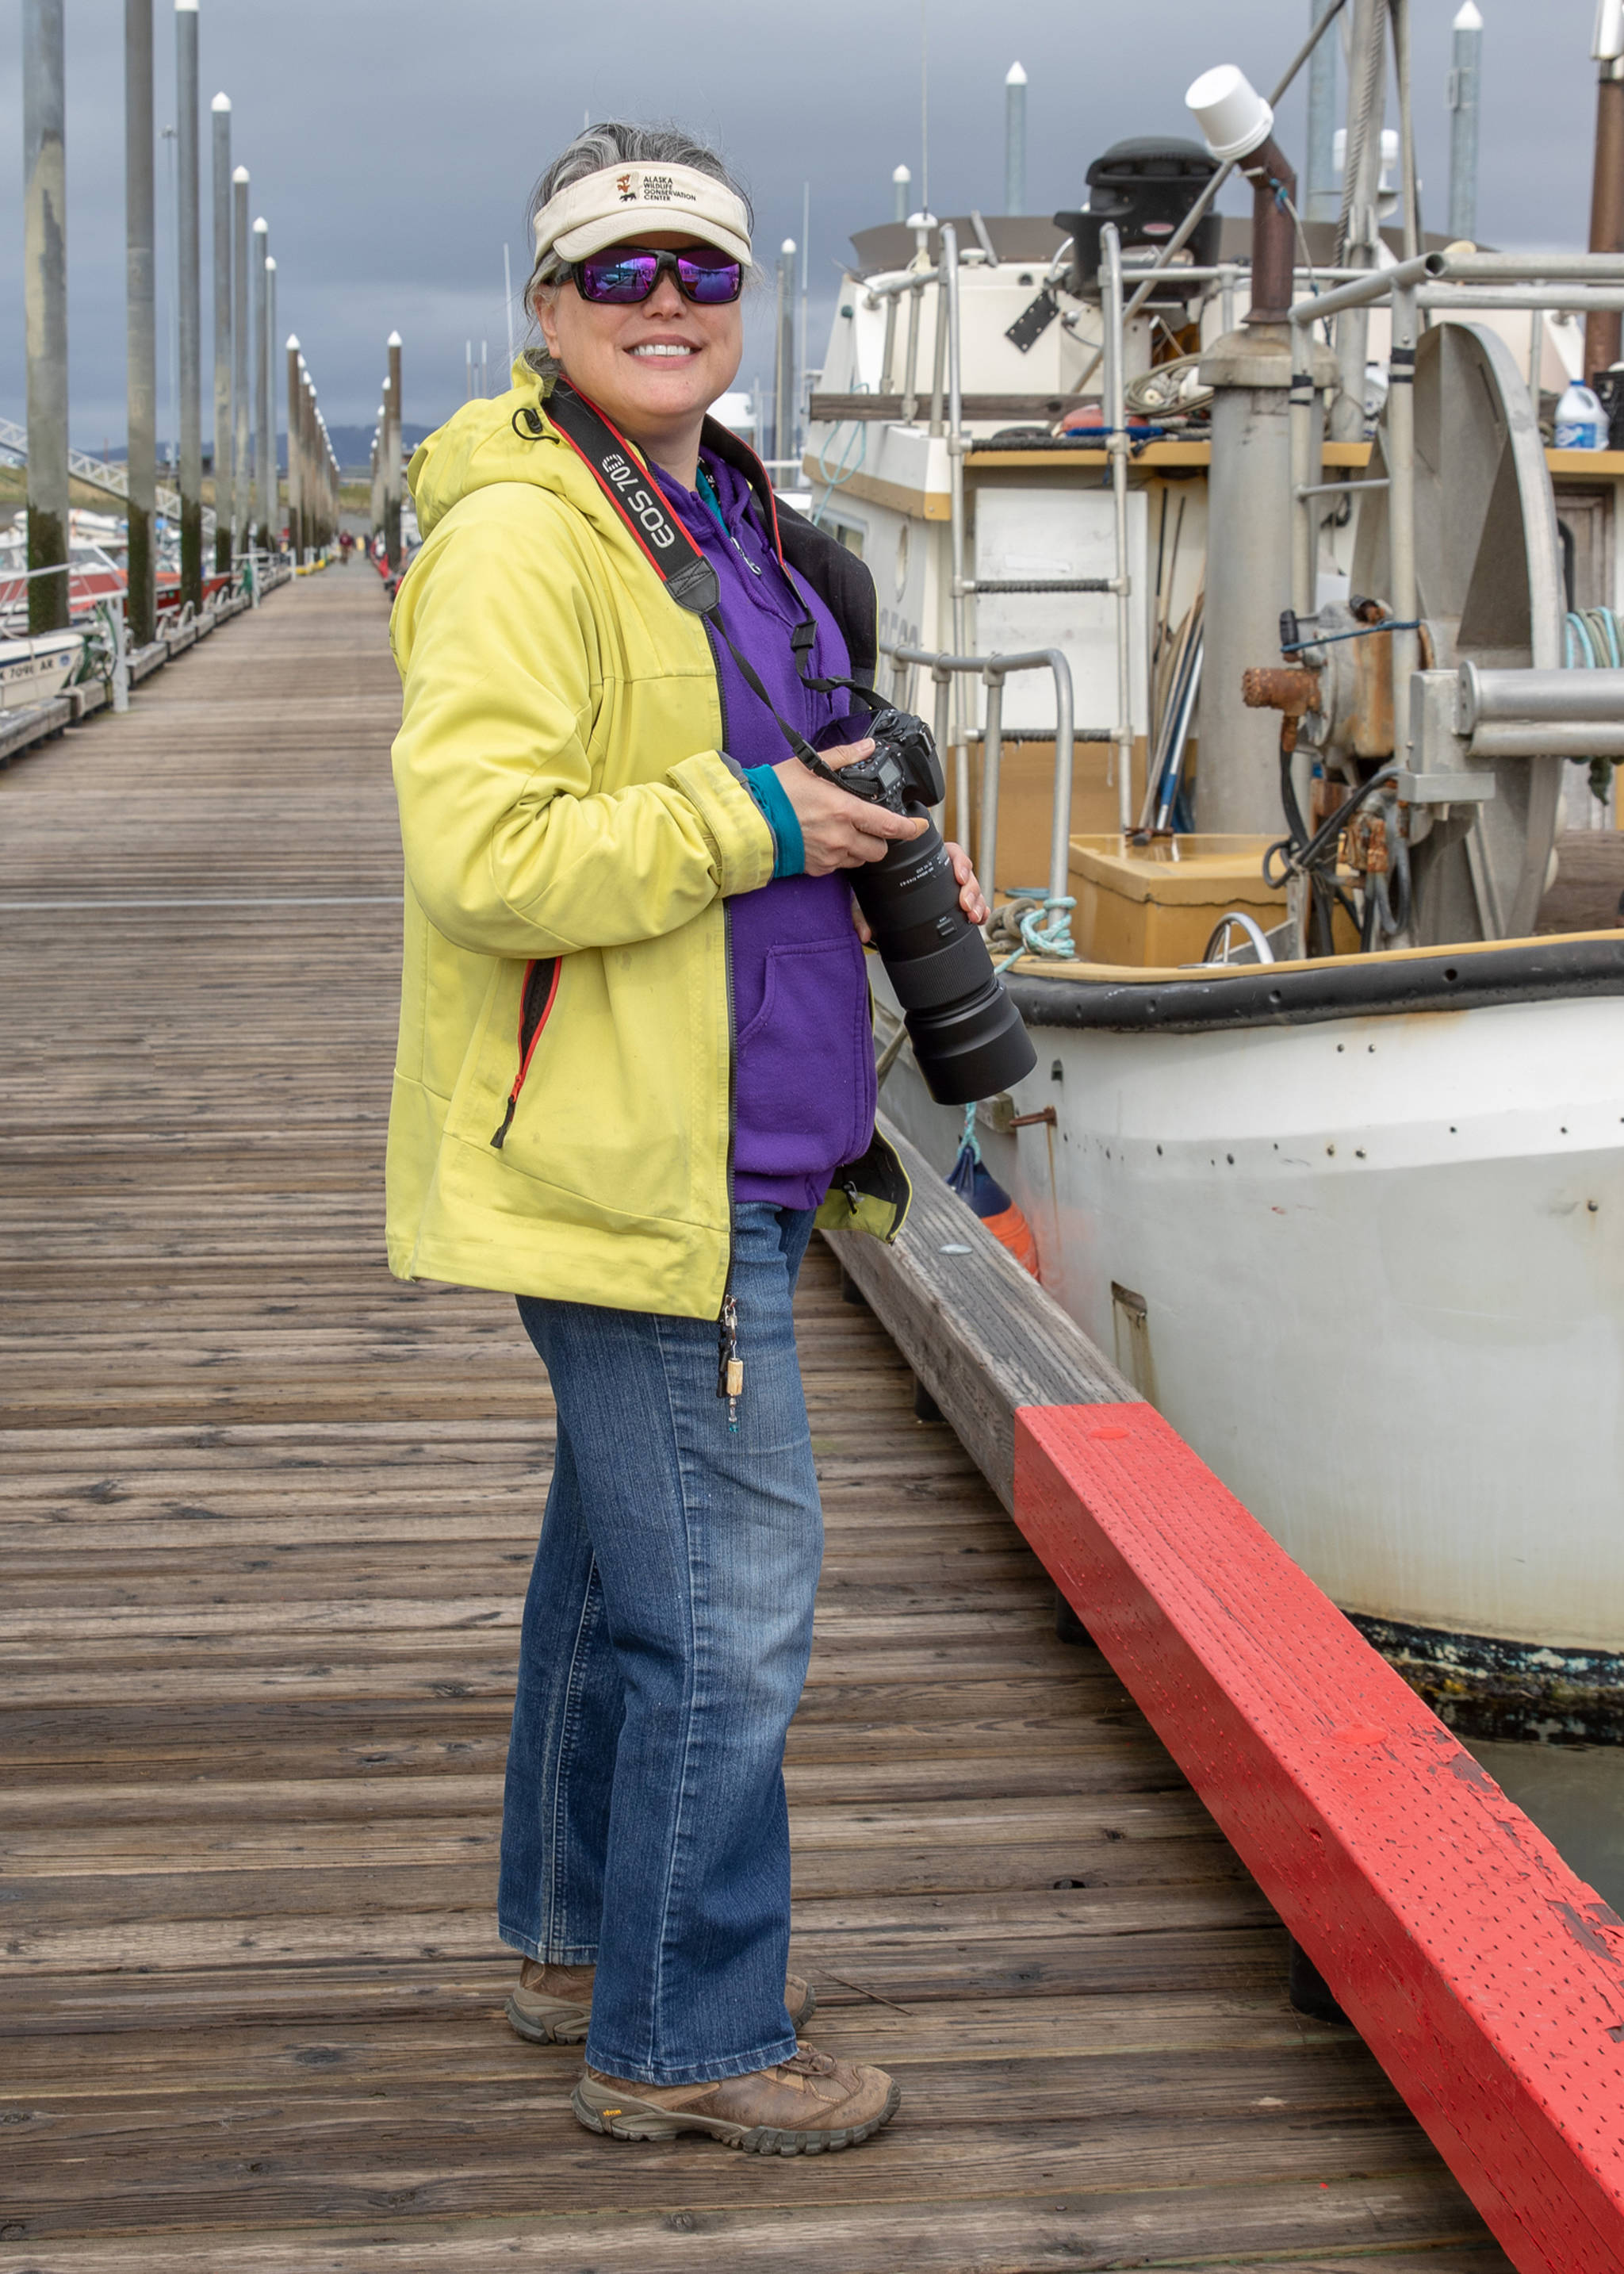 Kristin K’eit proves that you can still look colorful and well-dressed, even when going birding on a blustery day. Her colorful outfit includes a neon yellow waterproof shell by Oakley, purple sweatshirt, jeans and waterproof trail shoes by Vasque.